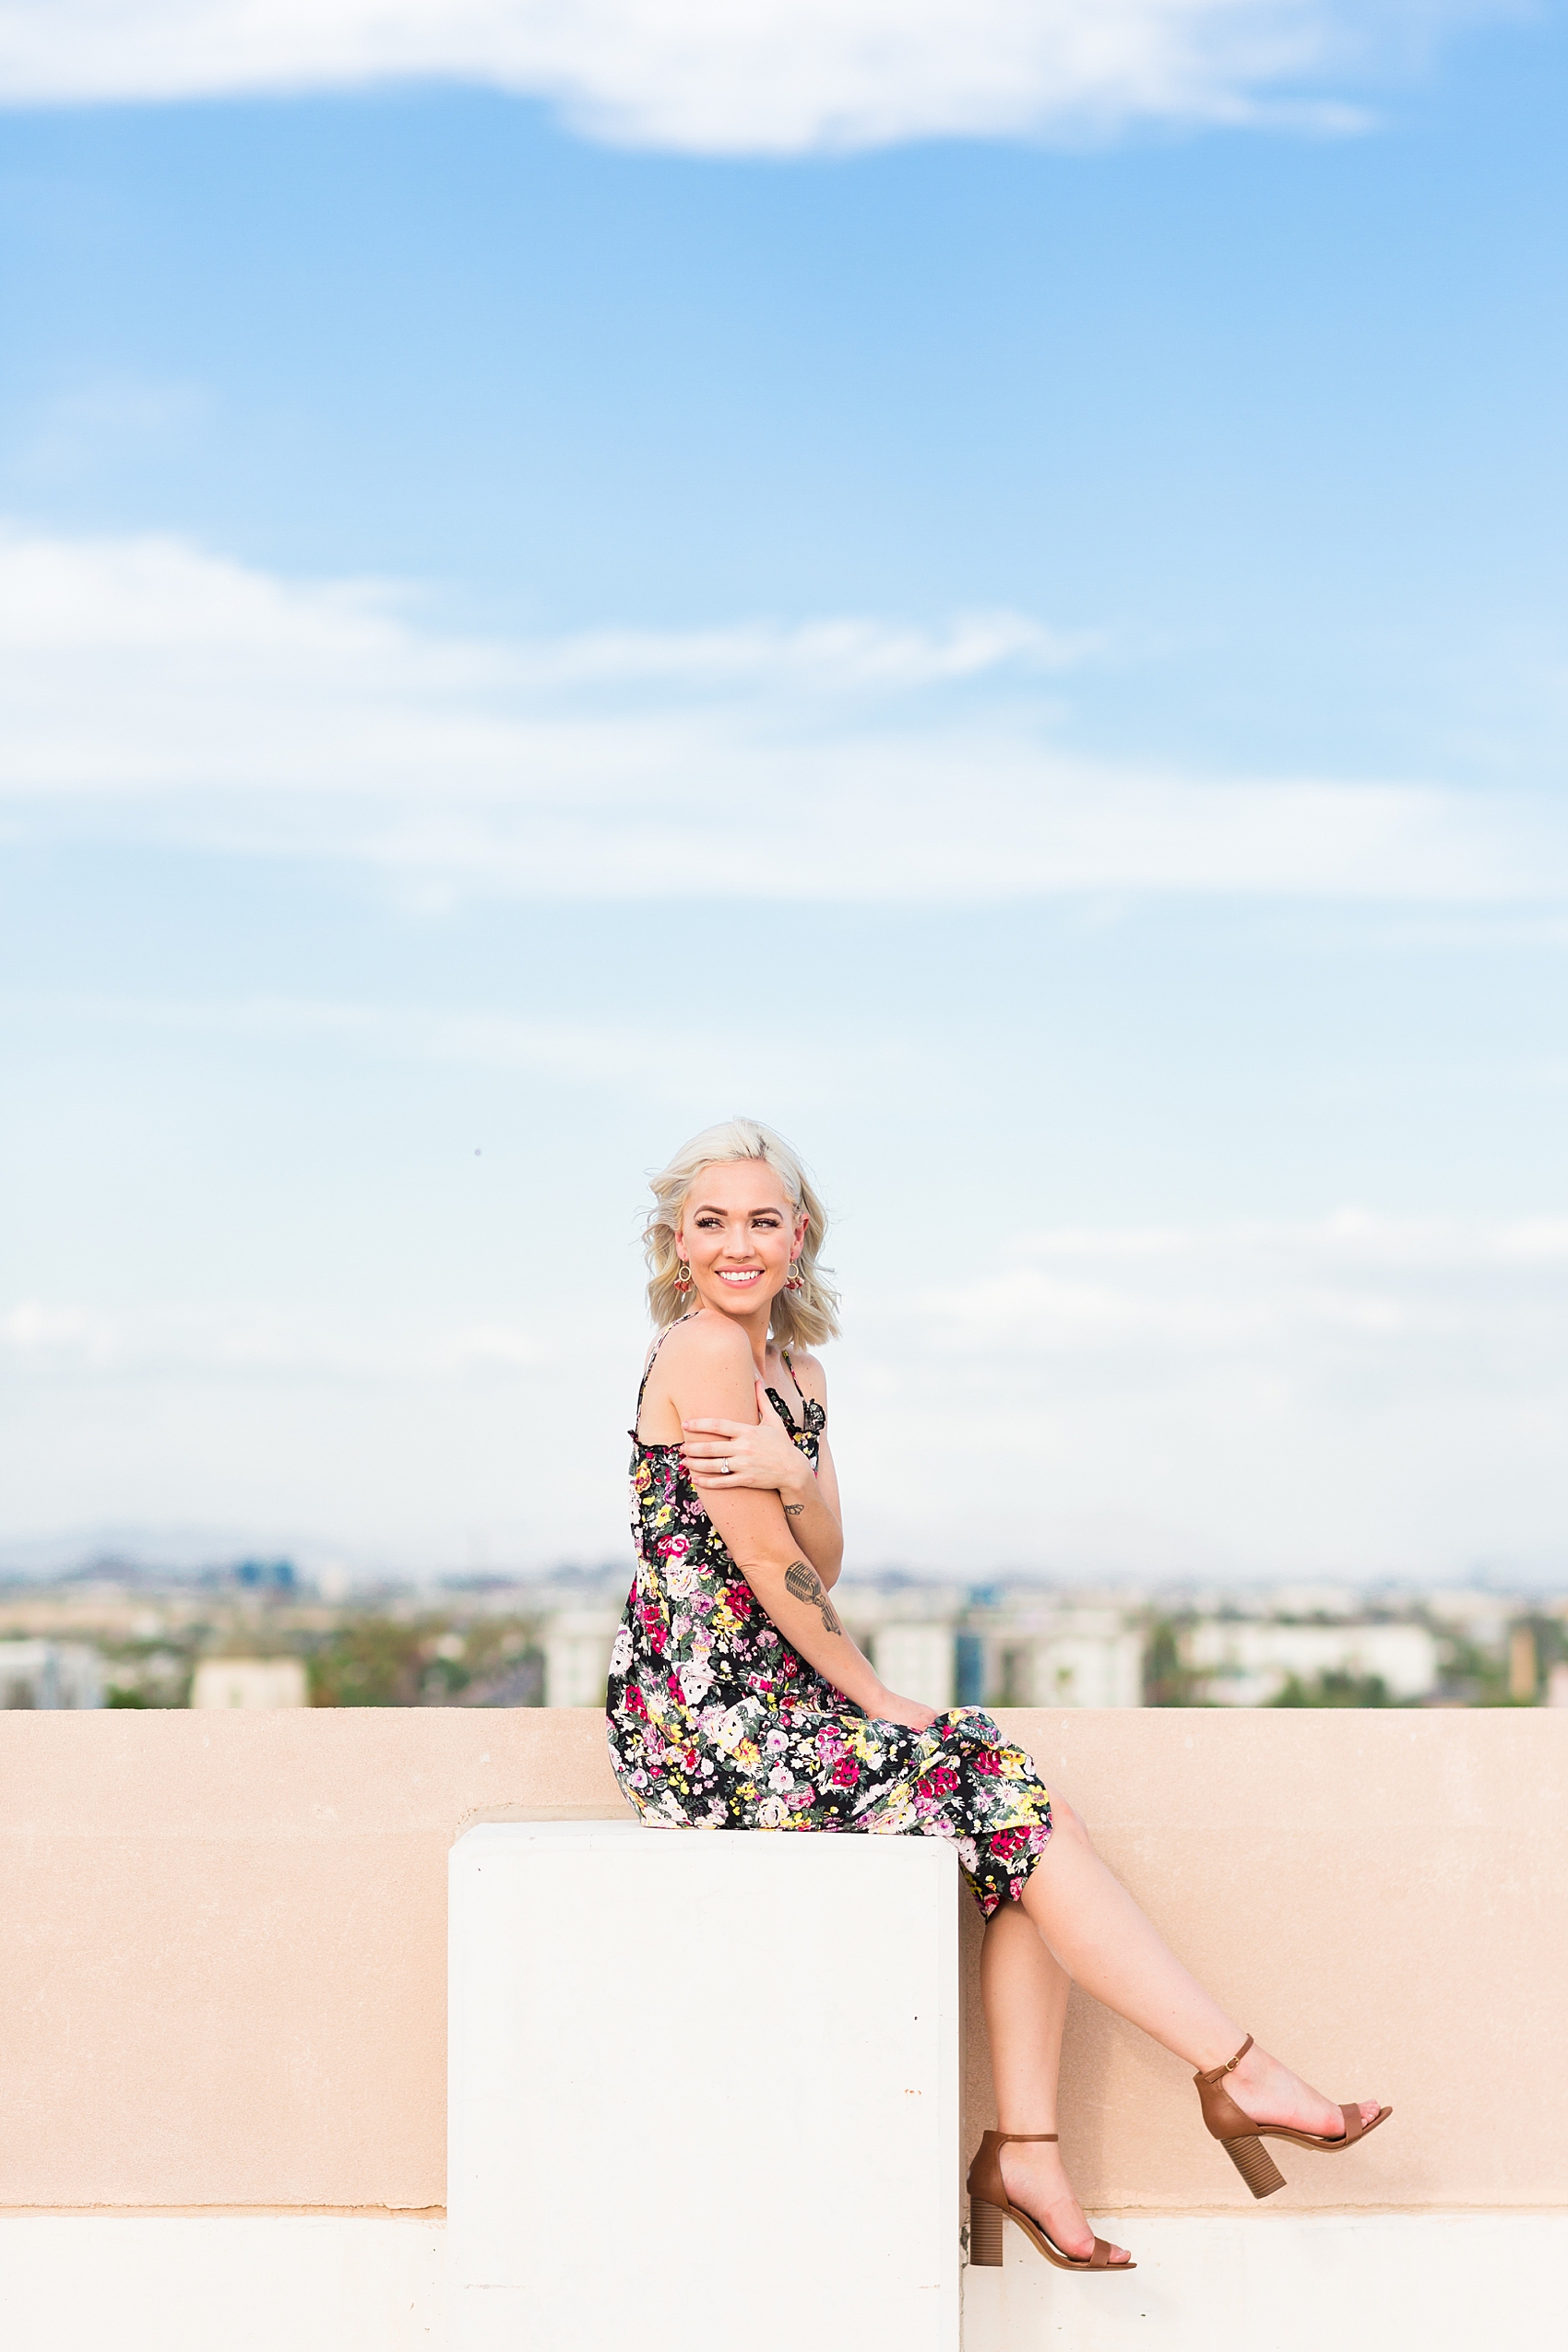 Leah Hope Photography | Downtown Phoenix Arizona Science Center Rooftop Fashion Modeling Pictures